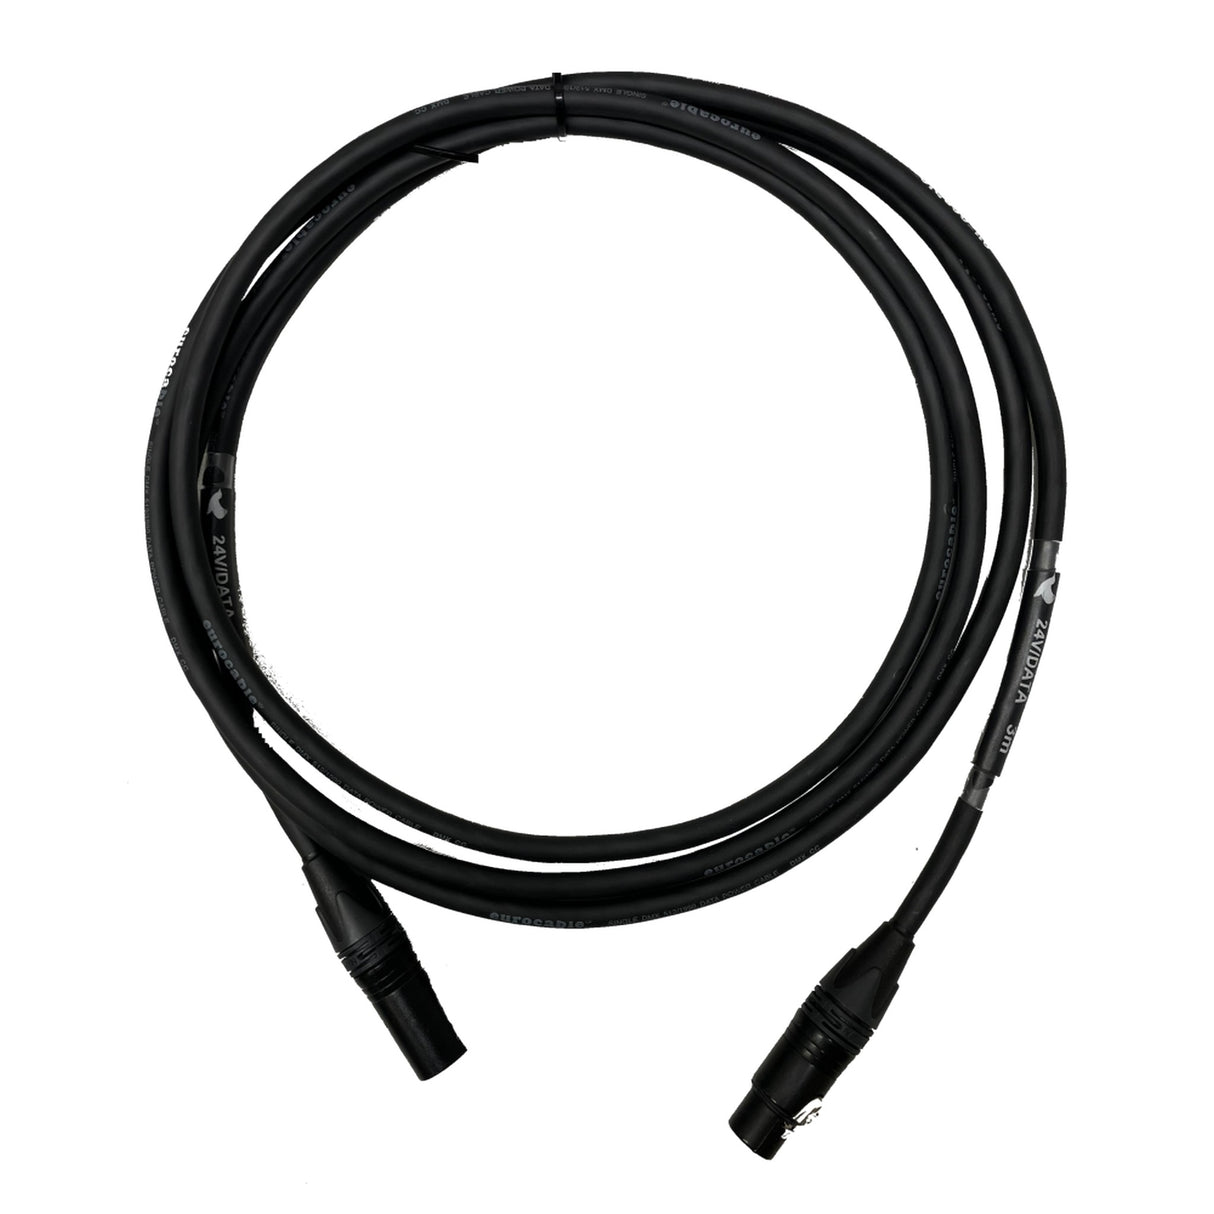 Waterbird 4-Pin XLR Power Data Cable for MS PRO/MS Swift/MS XL, 3-Meters